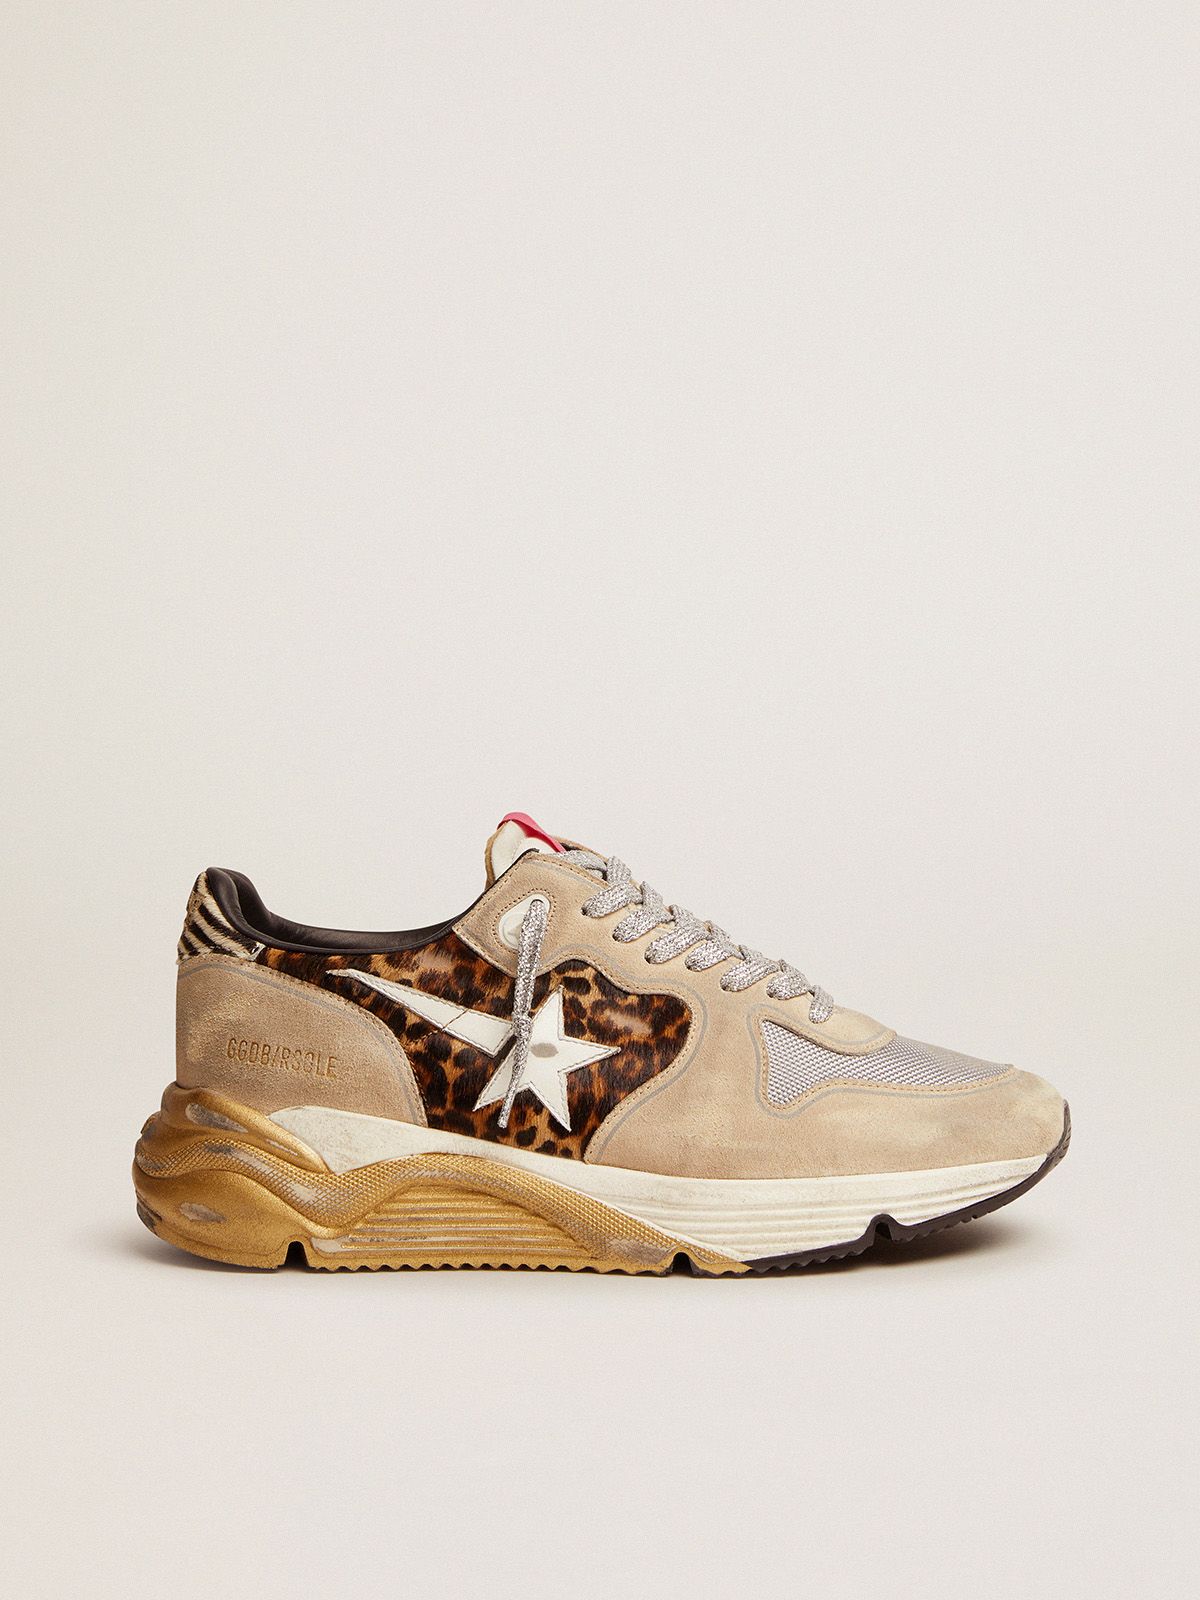 golden goose in Sole mesh LTD insert with skin pony Running sneakers leopard-print suede and